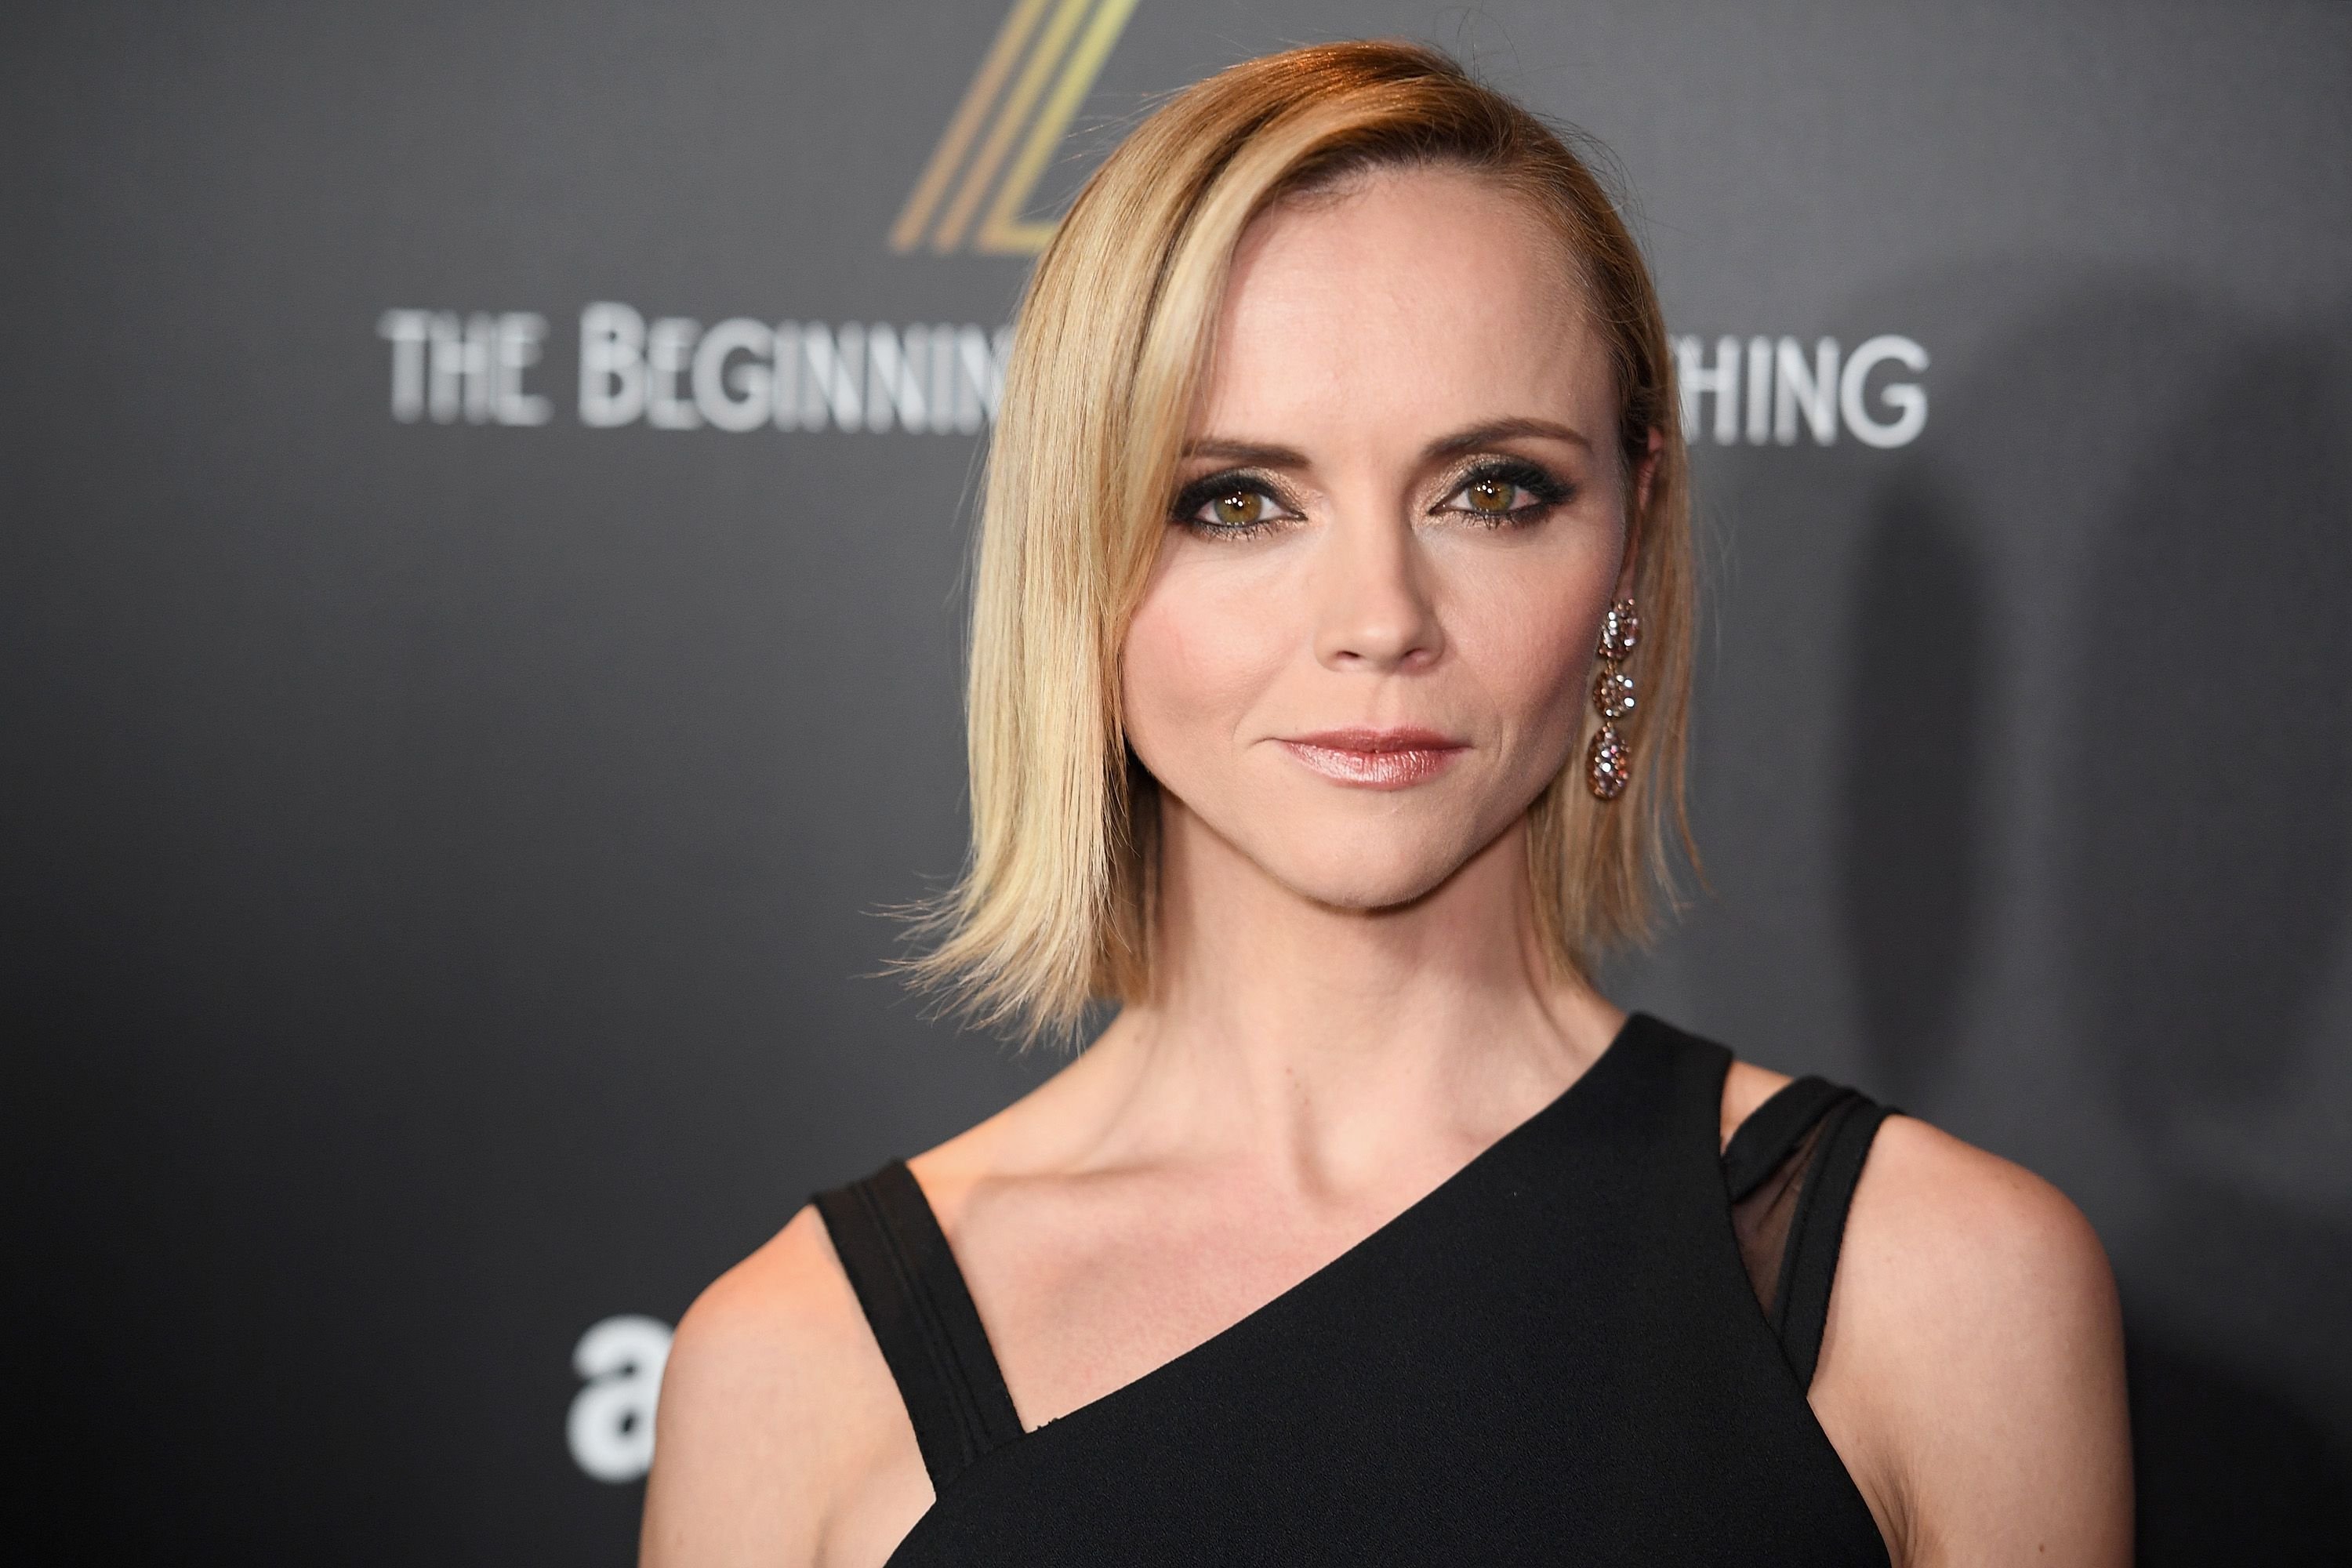 Christina Ricci at the premiere event for Amazon Prime Video's "Z: The Beginning of Everything" in New York City | Photo: Dimitrios Kambouris/Getty Images for Amazon